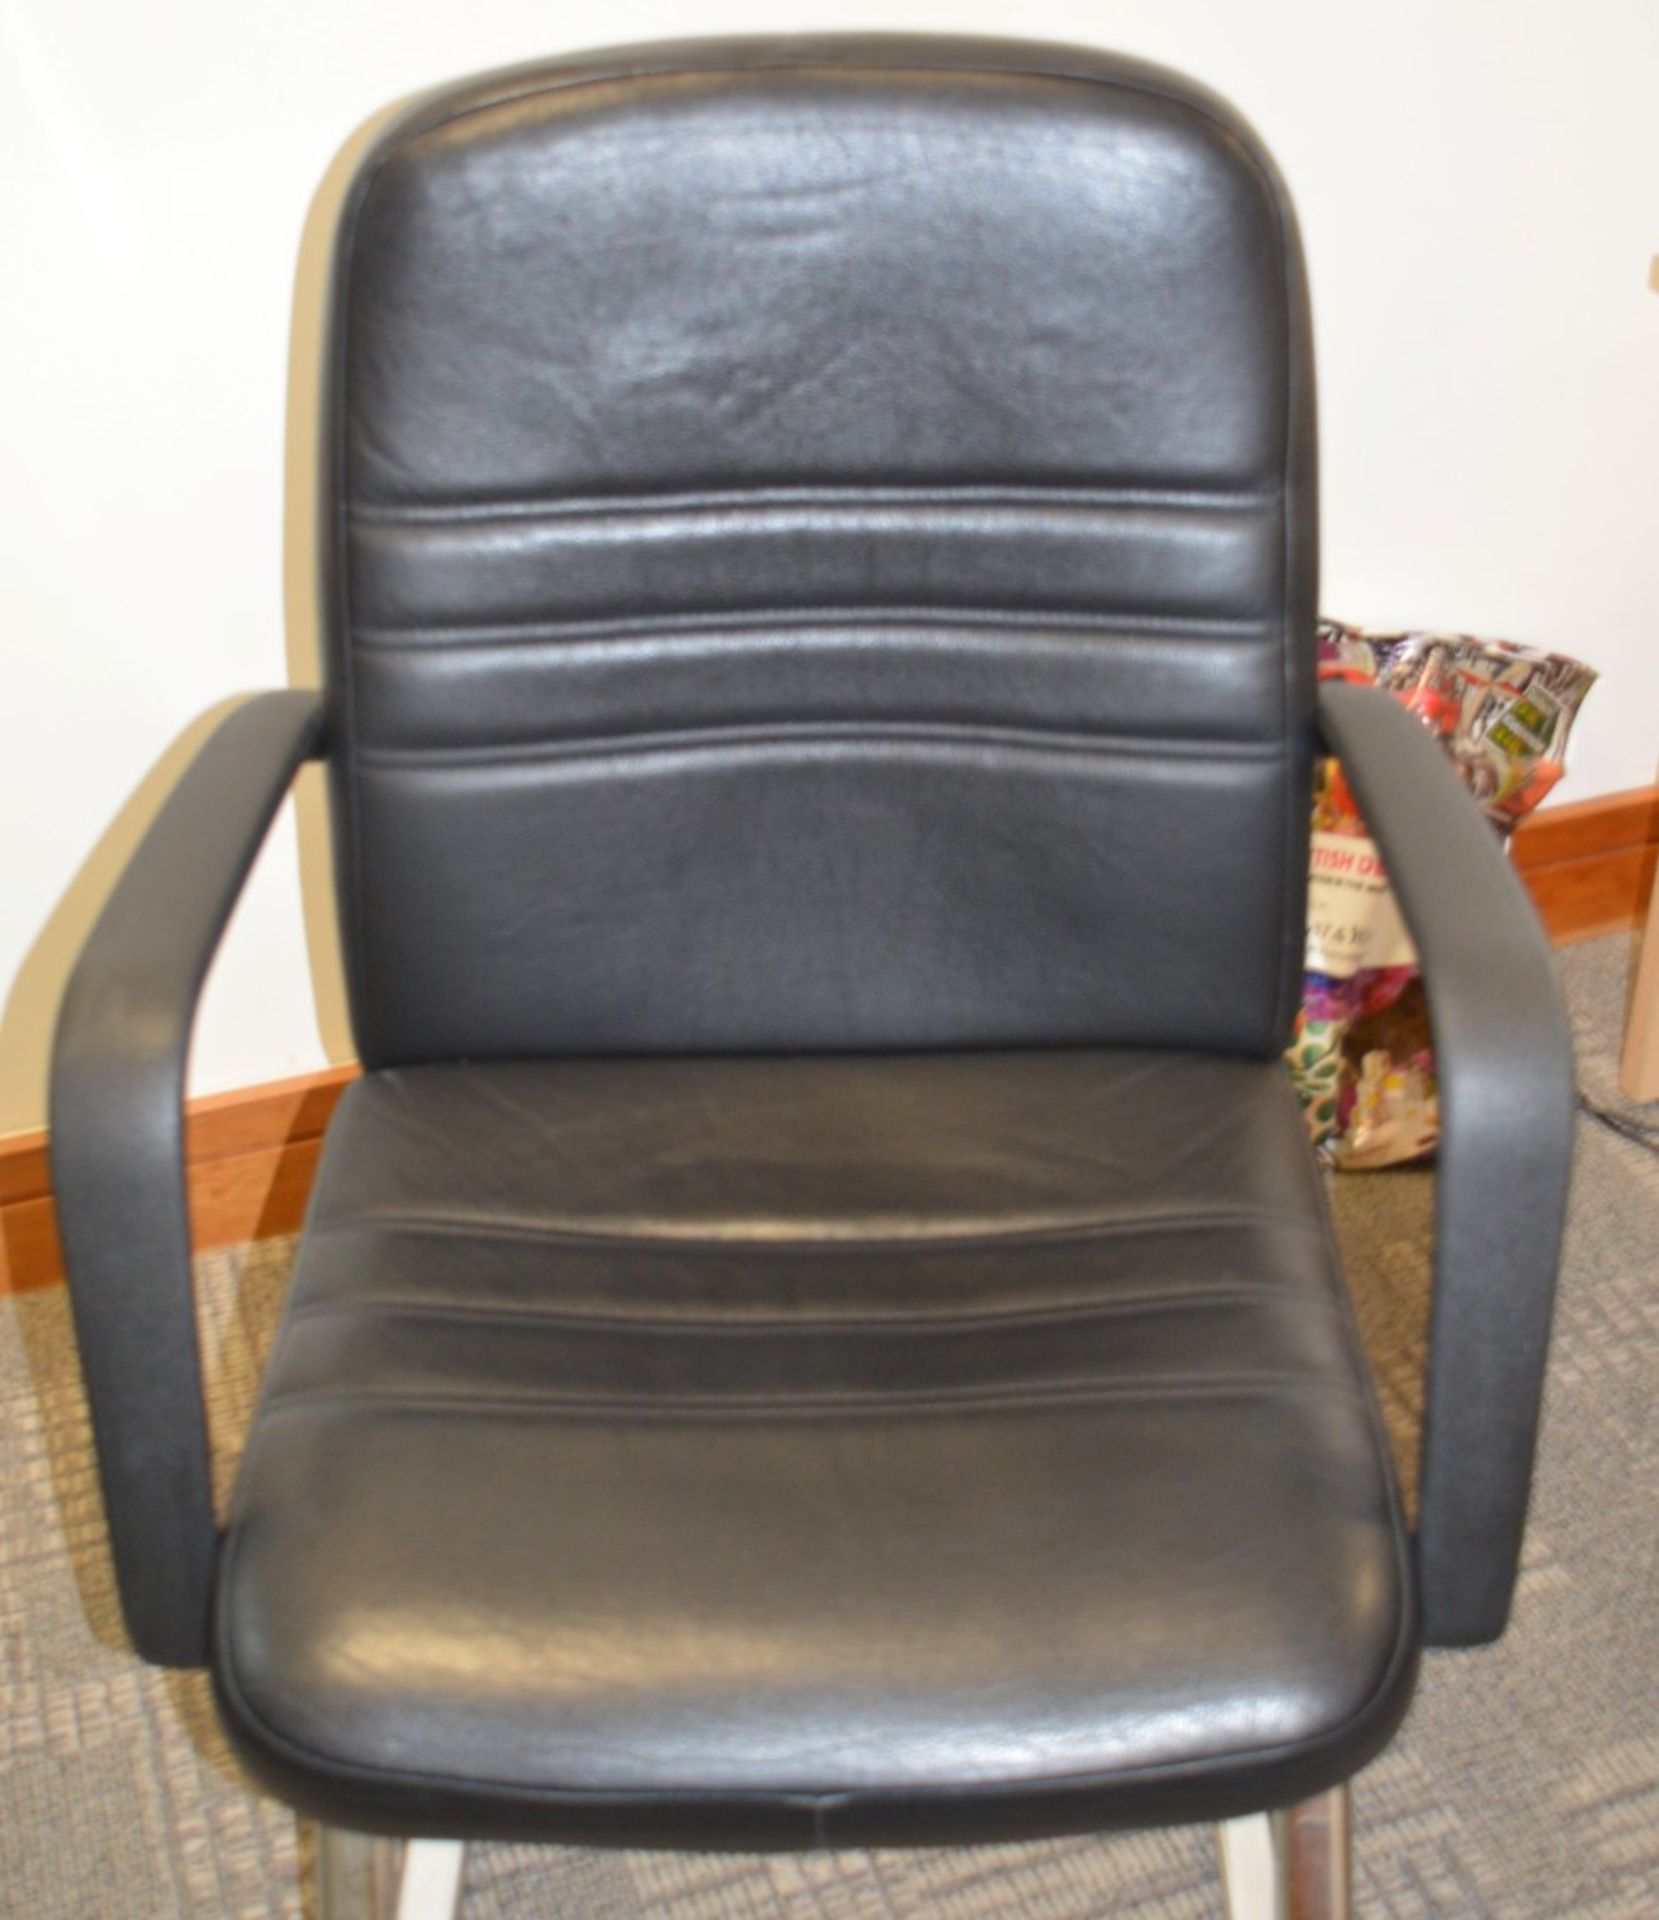 1 x Black Office Office Chair - Comfortable Design With Arm Rests and Chrome Base - Ref SB203 - - Image 3 of 4